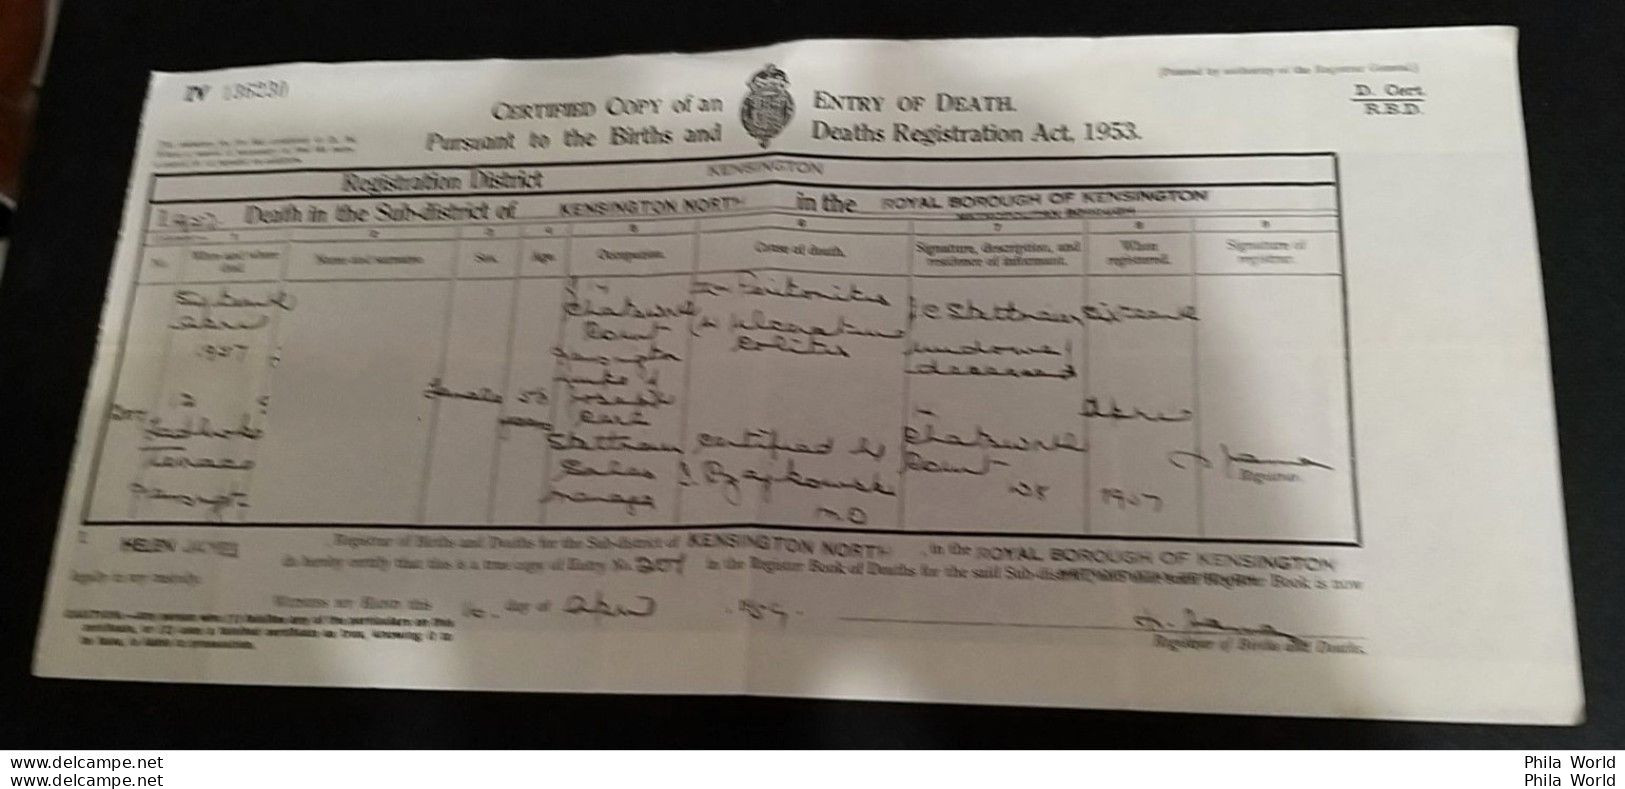 CERTIFIED COPY Of An ENTRY Of DEATH Registration District Royal Borough Of KENSINGTON North GB 1957 - Historical Documents